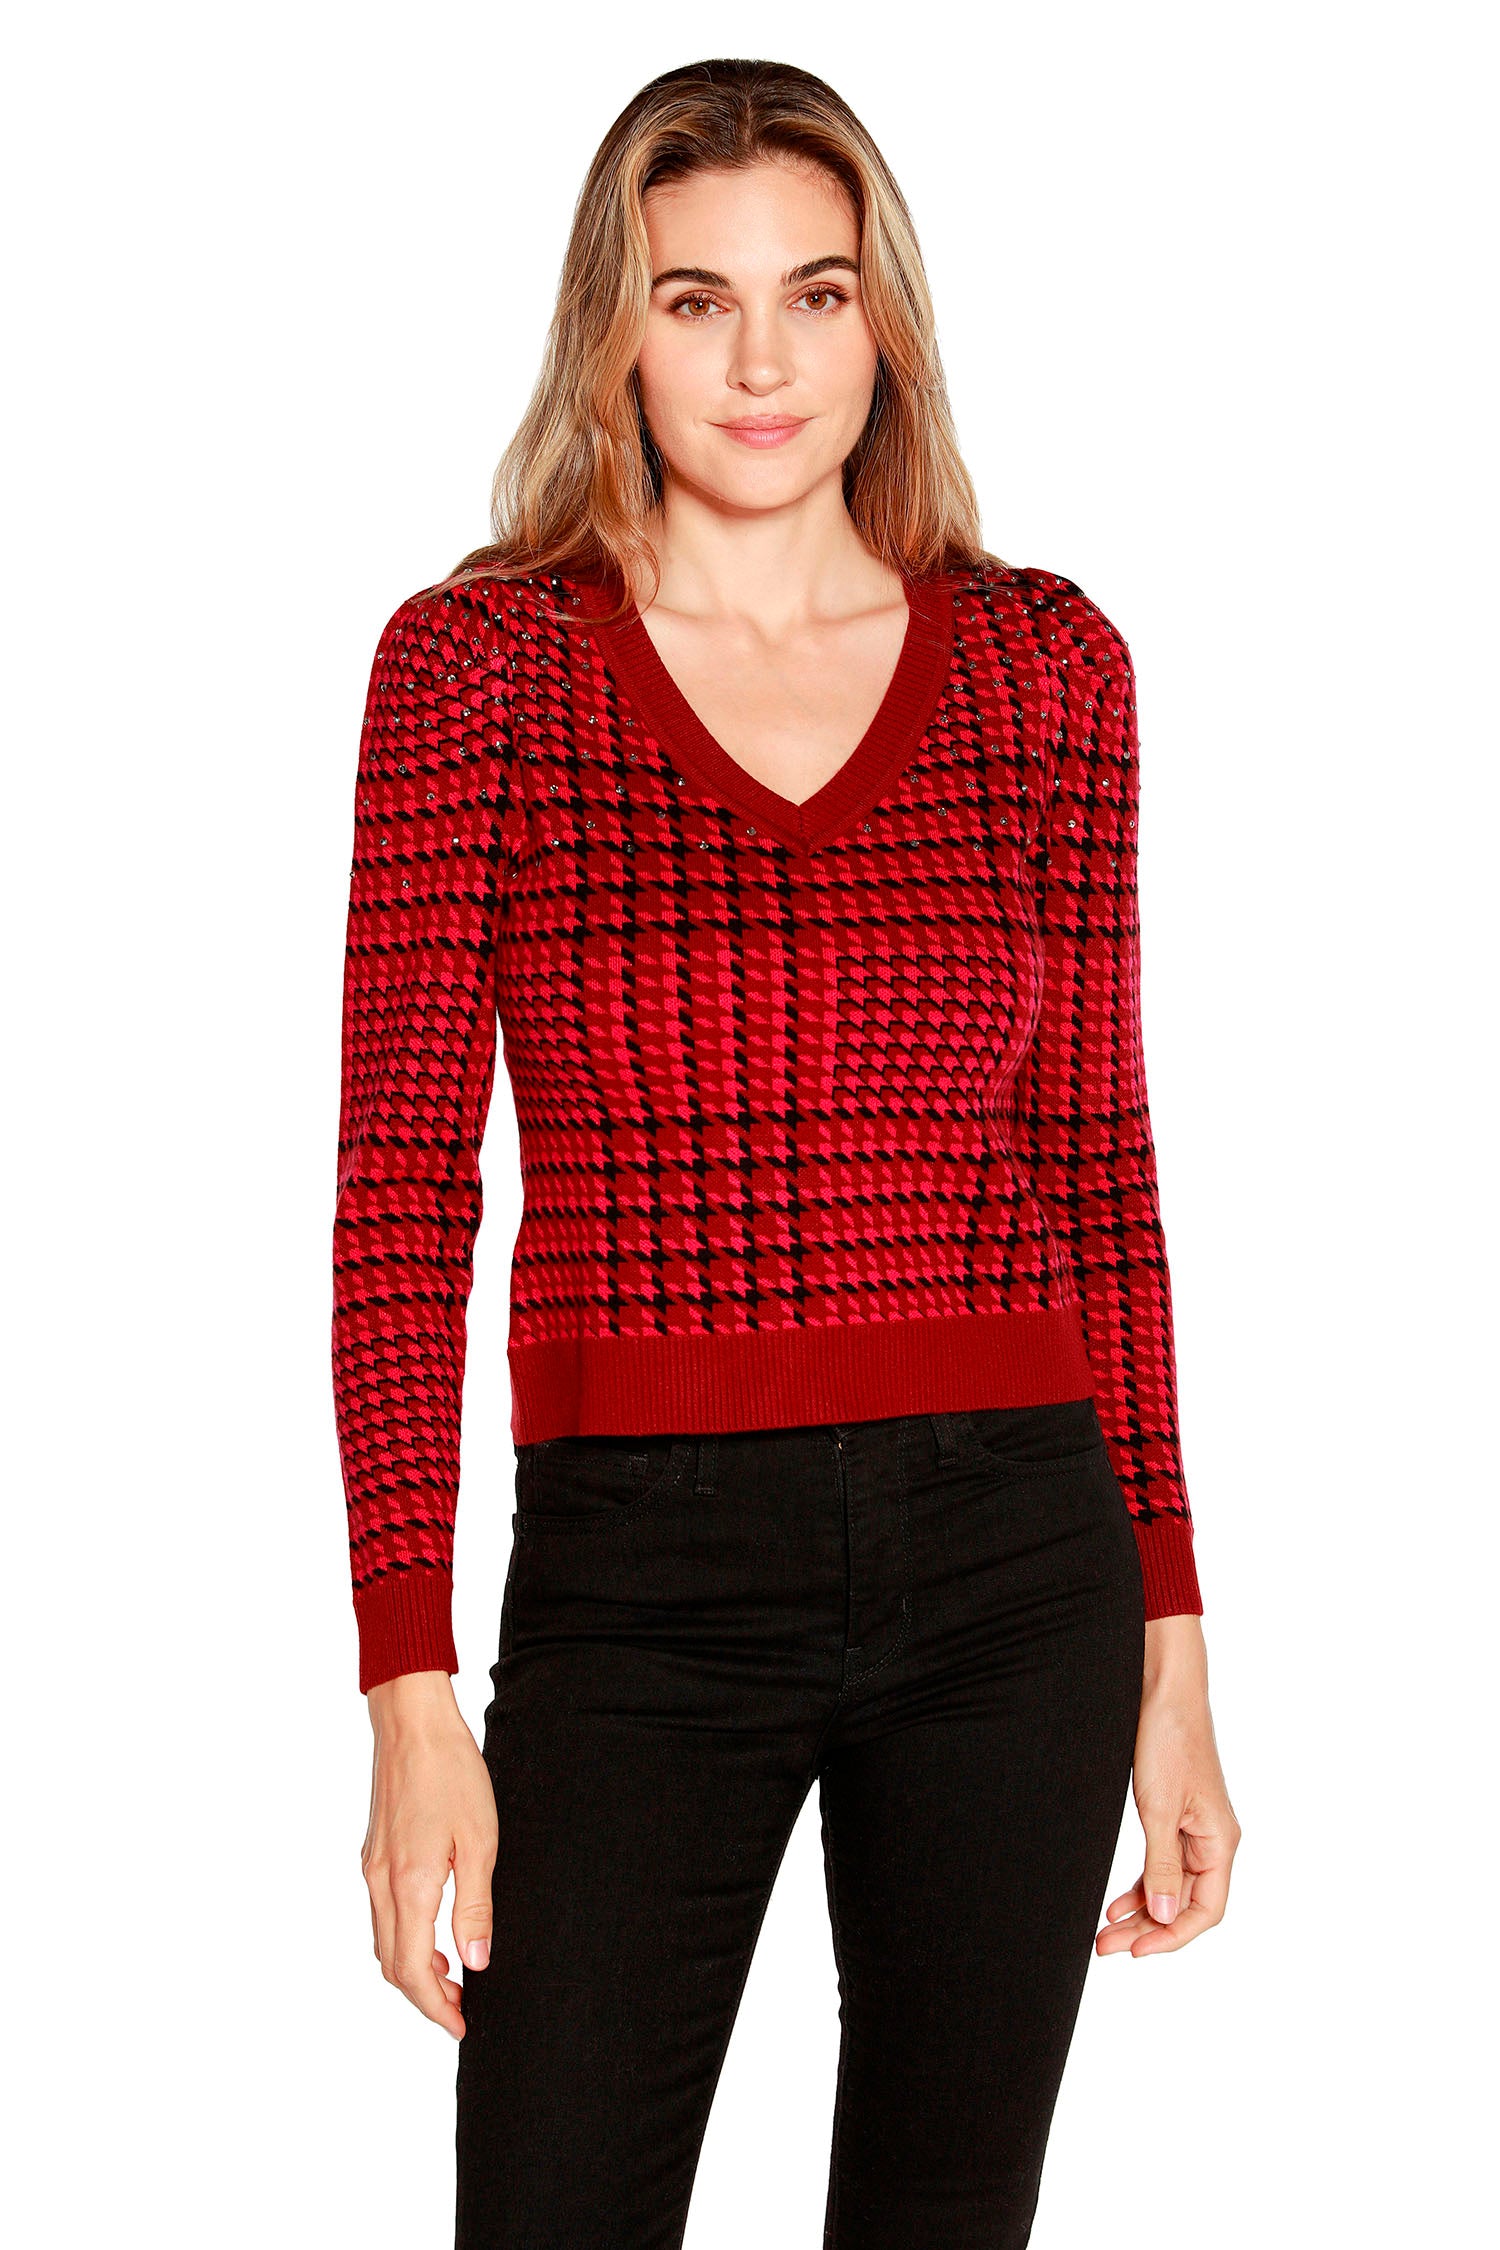 Women's Classic Plaid Sweater with Puff Sleeves, Rhinestones and V-neck